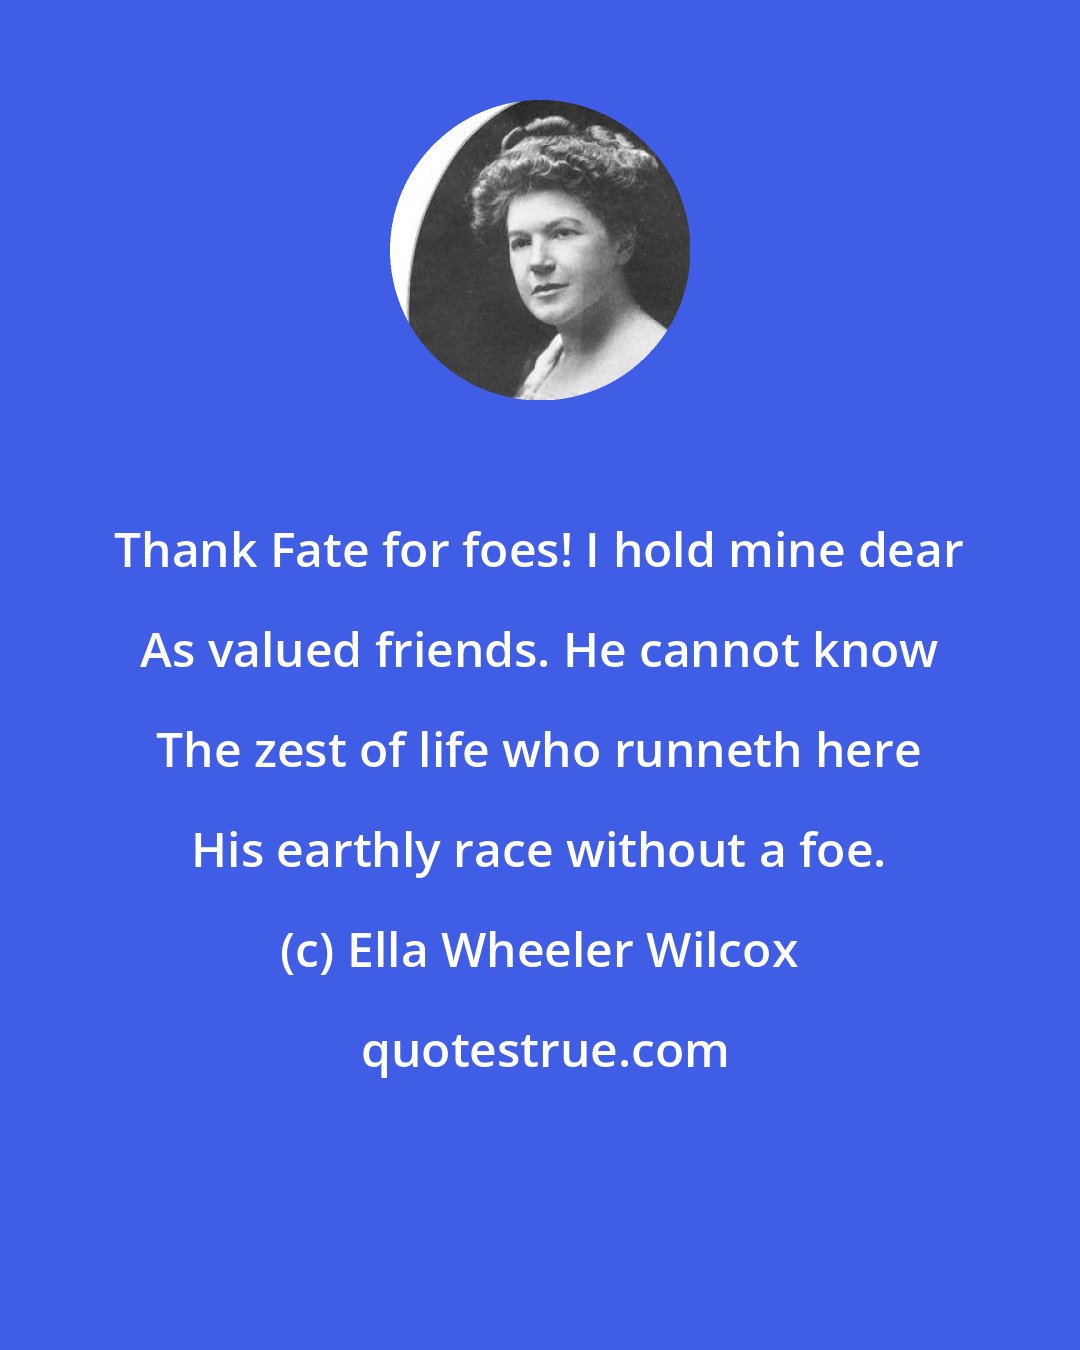 Ella Wheeler Wilcox: Thank Fate for foes! I hold mine dear As valued friends. He cannot know The zest of life who runneth here His earthly race without a foe.